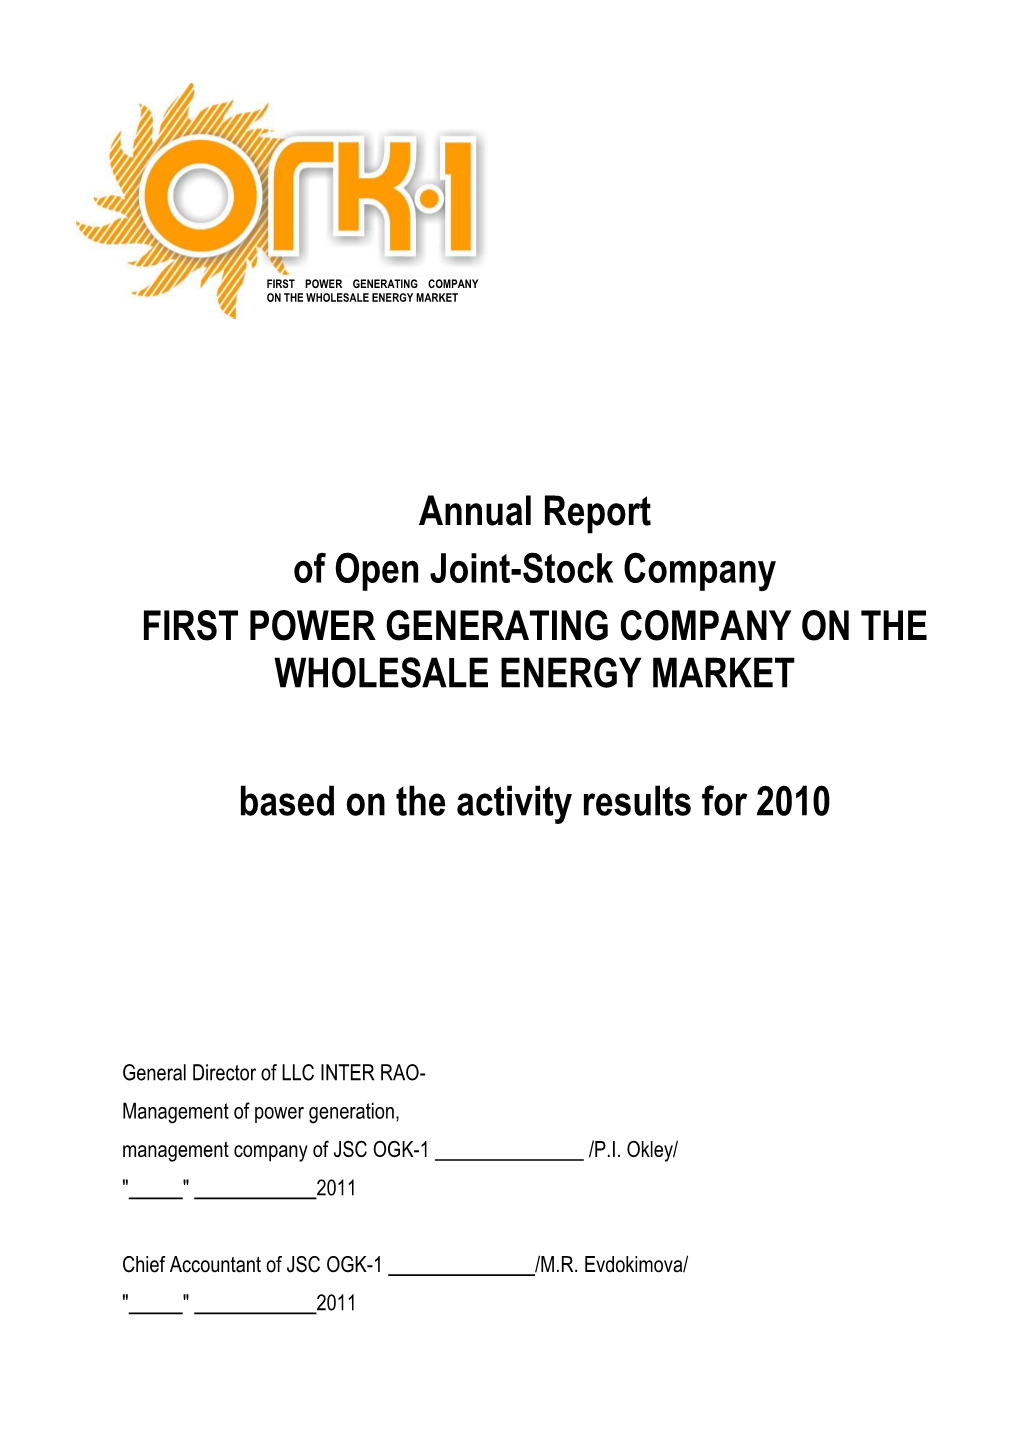 Annual Report of Open Joint-Stock Company FIRST POWER GENERATING COMPANY on the WHOLESALE ENERGY MARKET